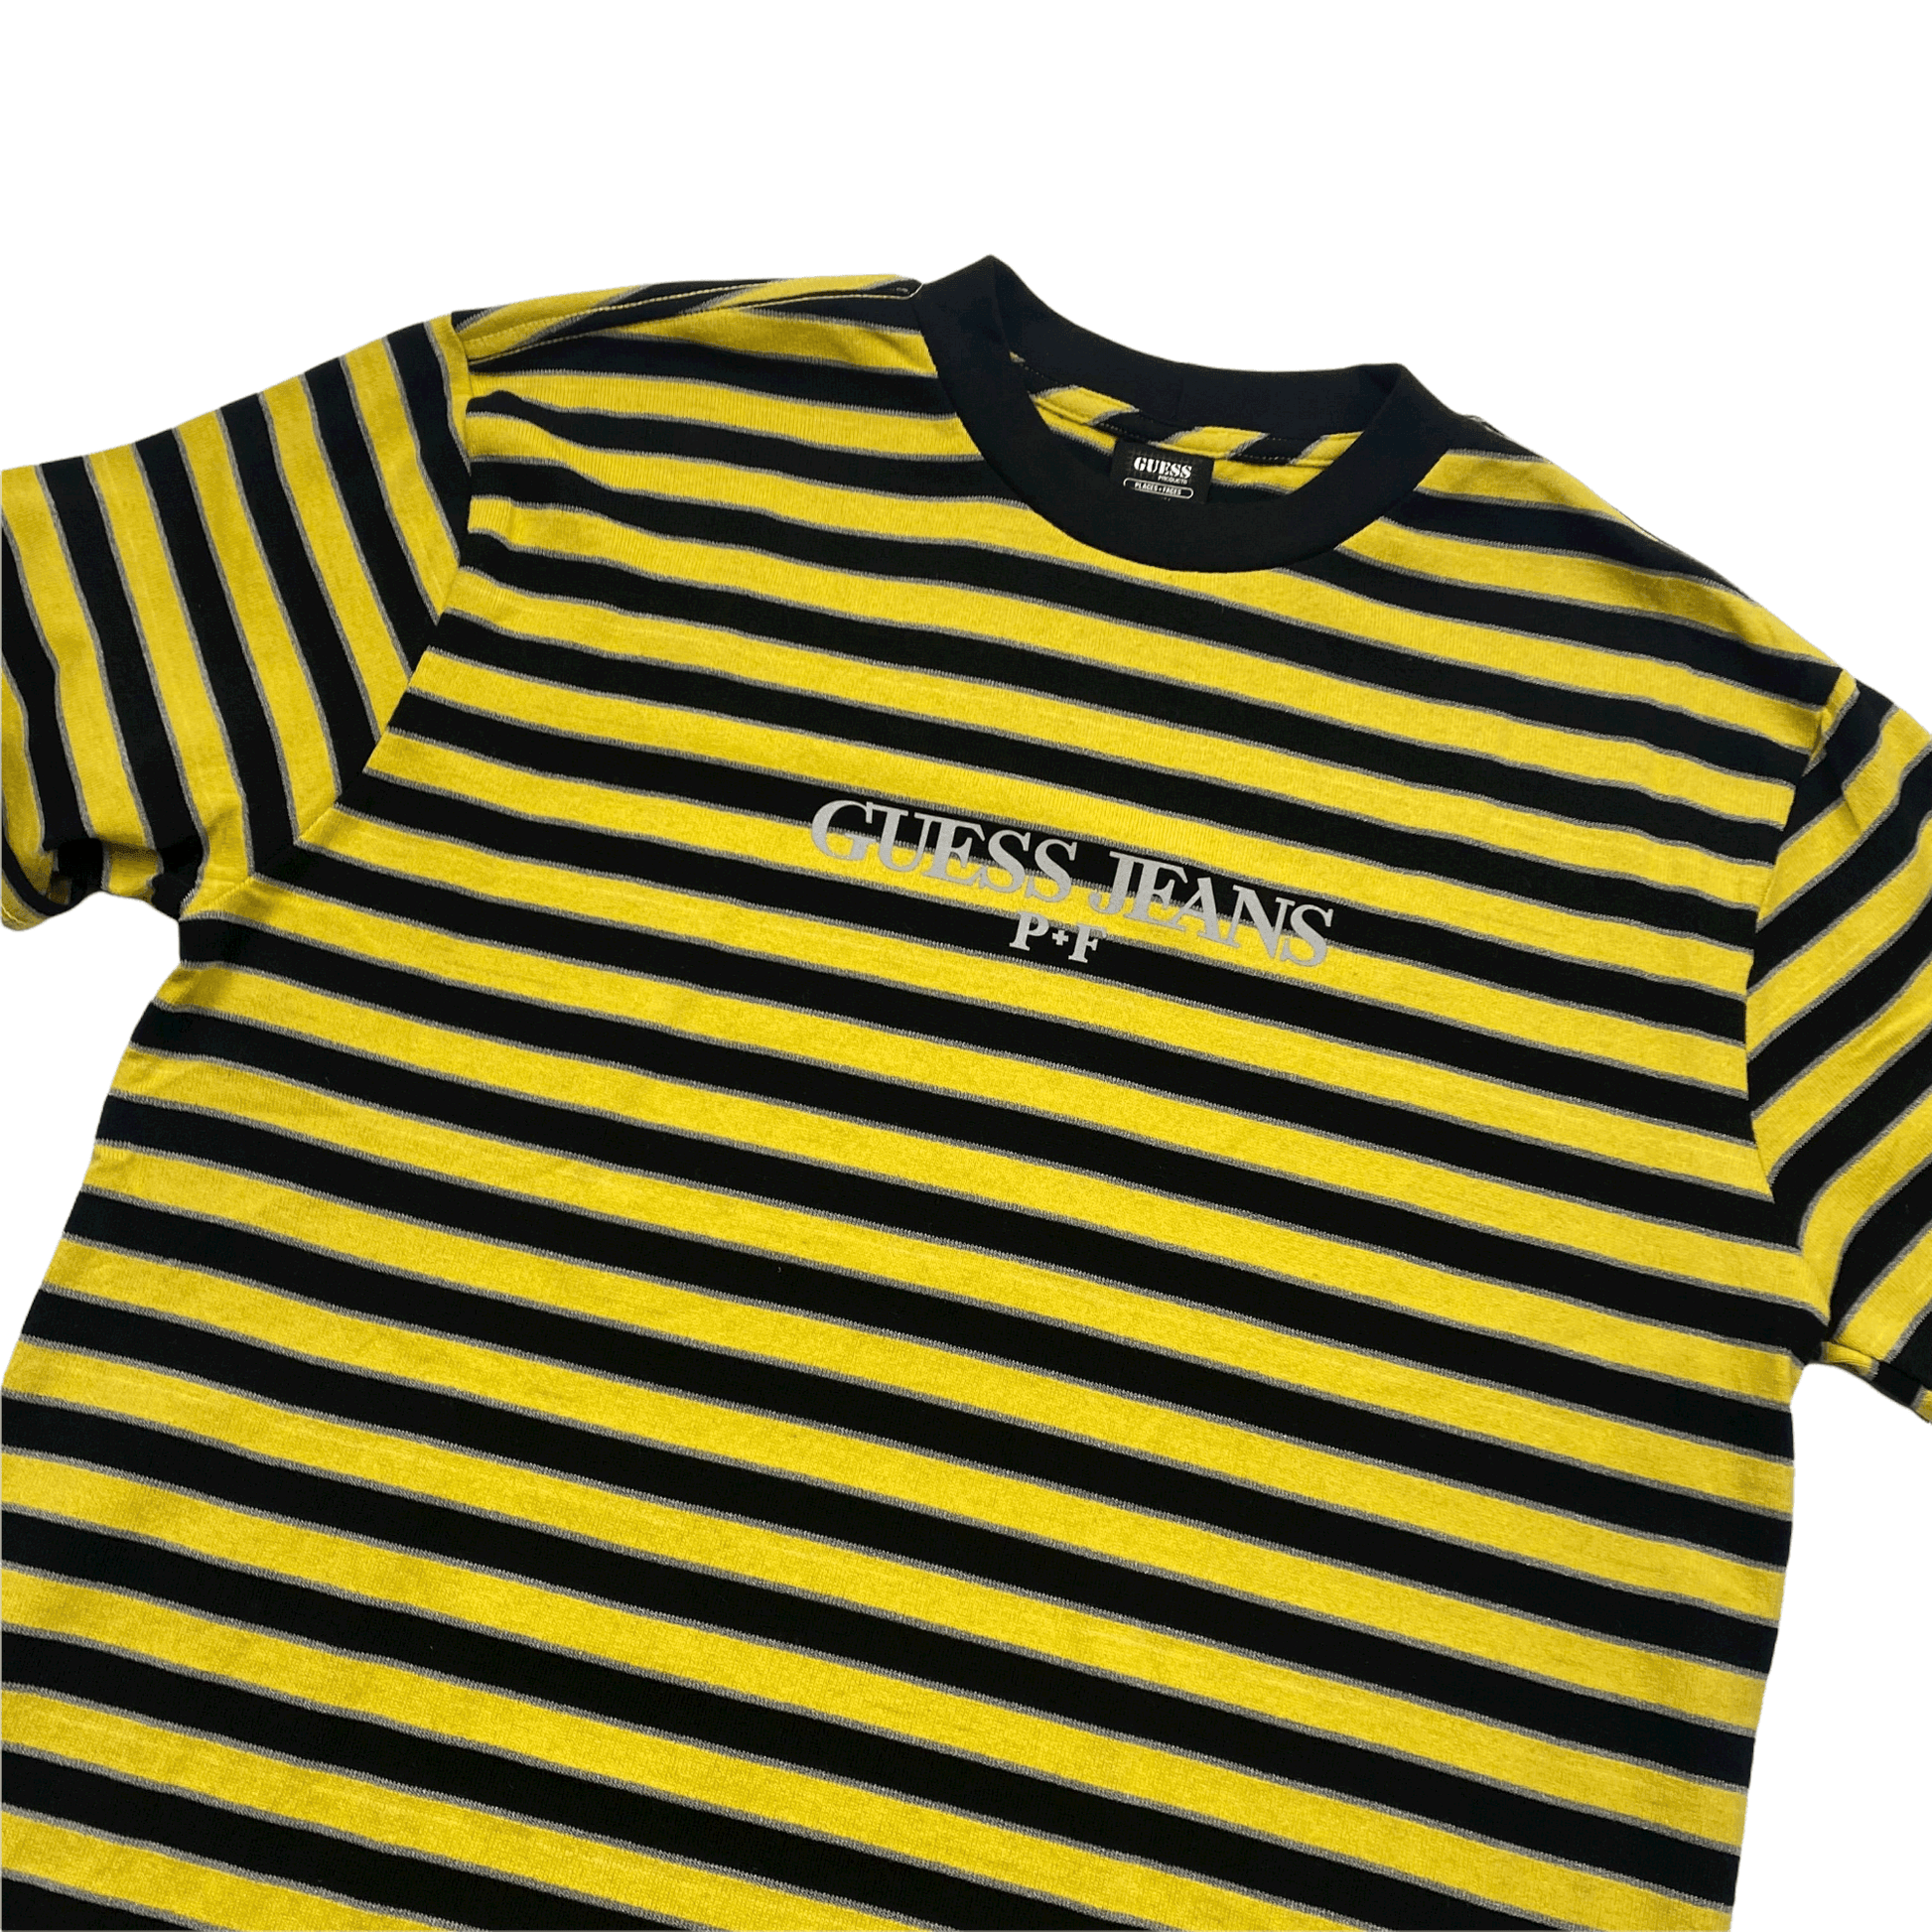 Black + Yellow Guess Jeans x Places + Faces Striped Tee - The Streetwear Studio